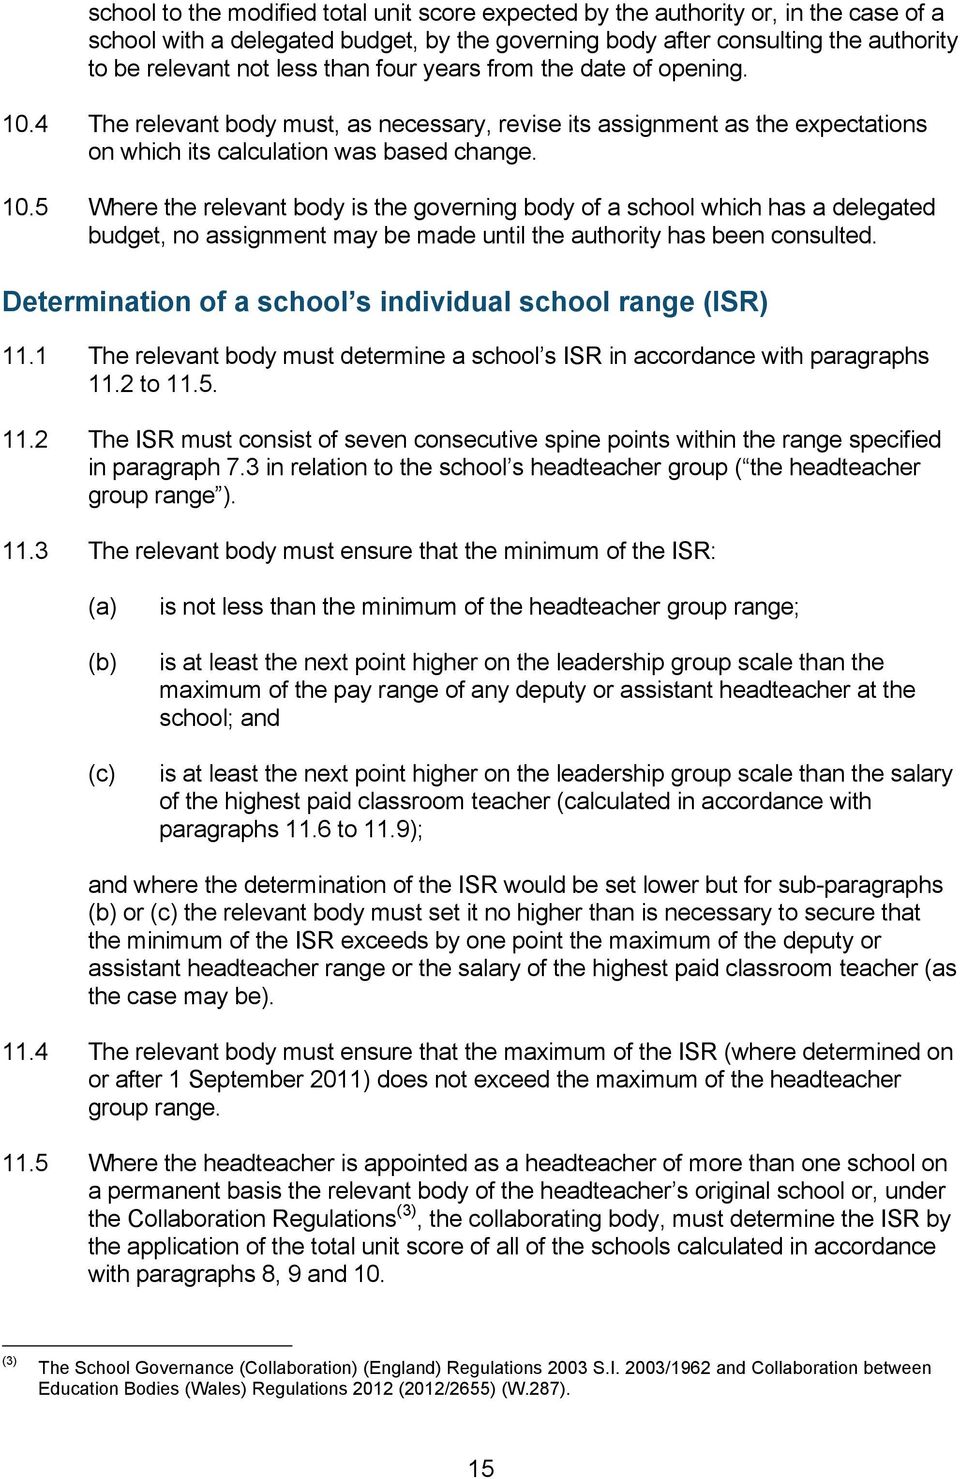 Determination of a school s individual school range (ISR) 11.1 The relevant body must determine a school s ISR in accordance with paragraphs 11.2 to 11.5. 11.2 The ISR must consist of seven consecutive spine points within the range specified in paragraph 7.